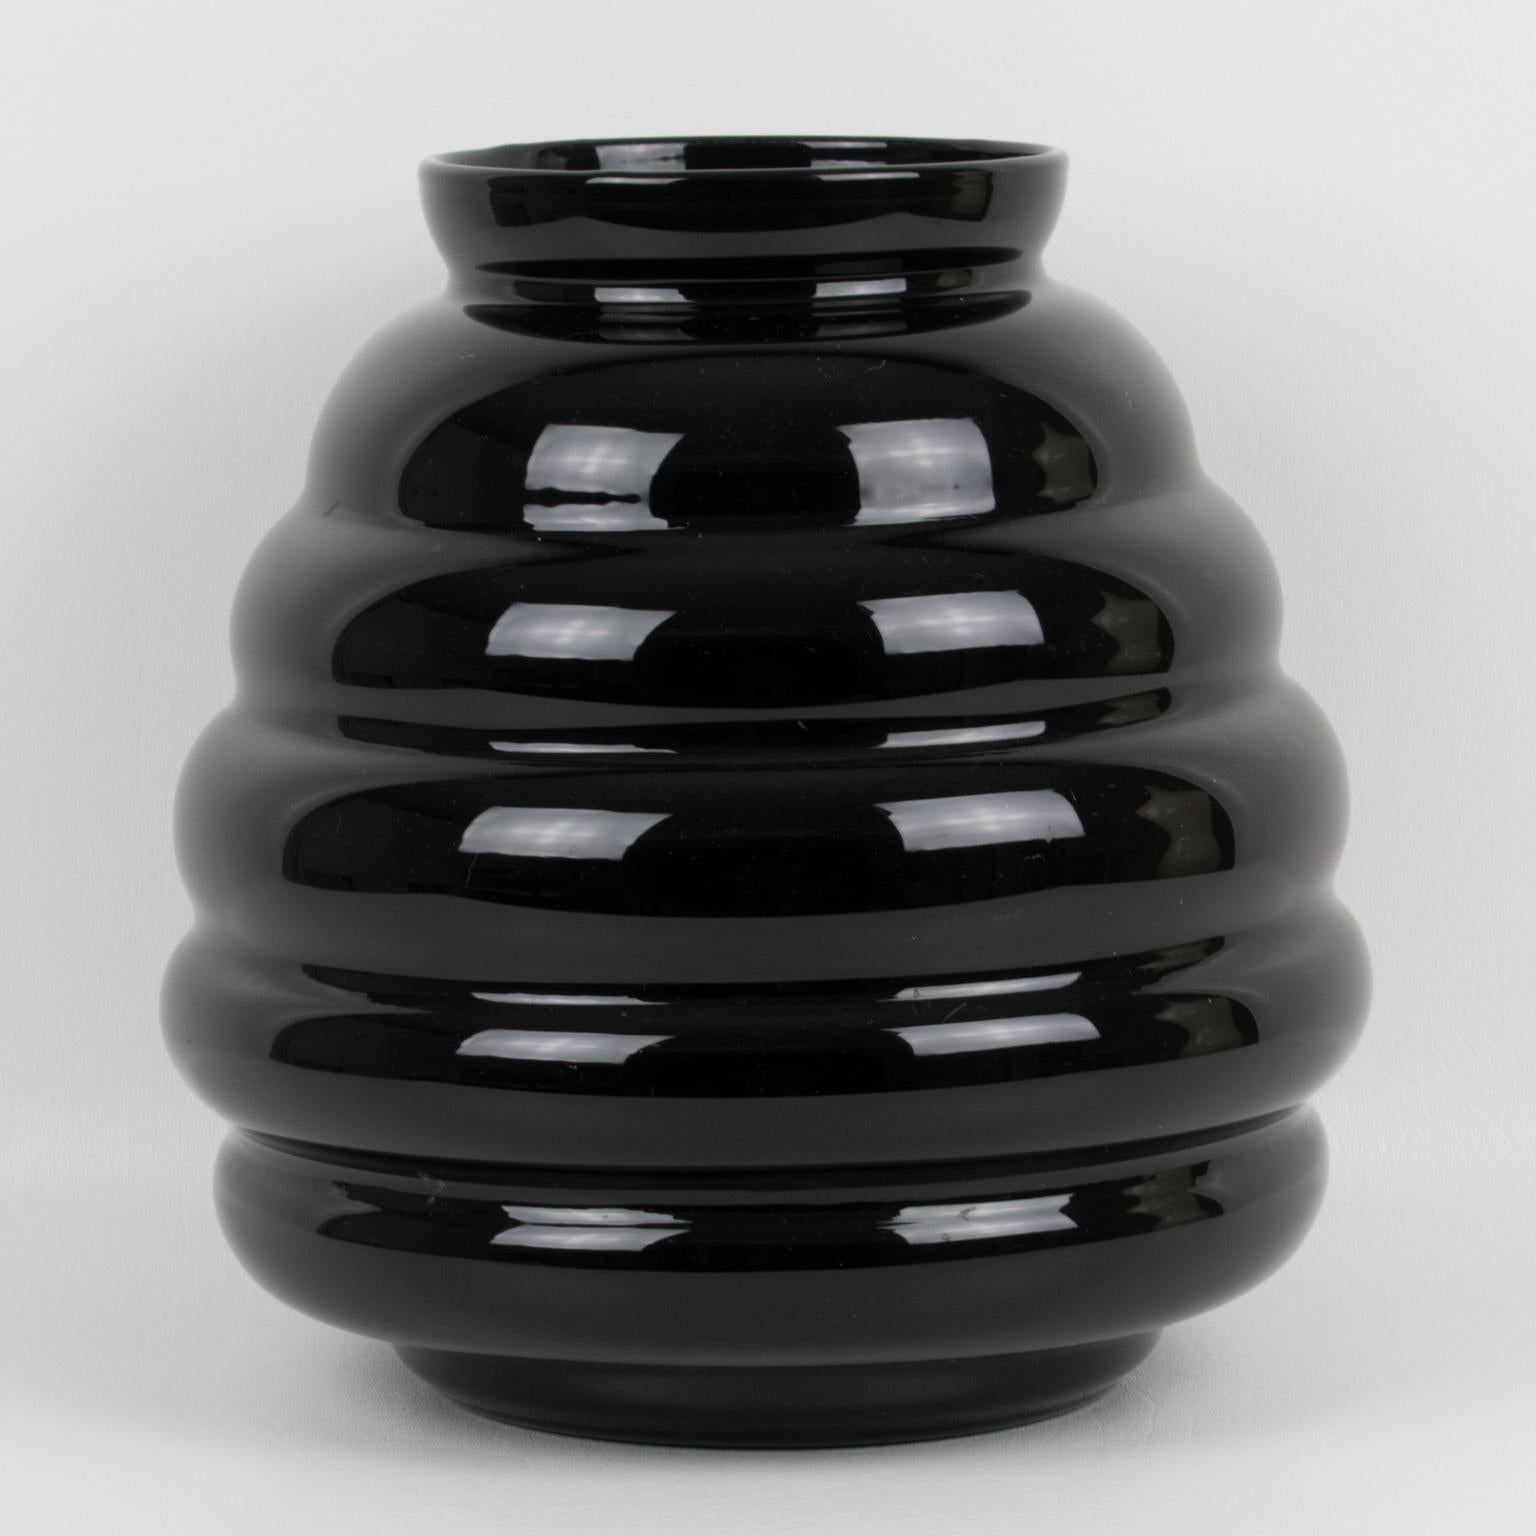 This stunning black opaline glass vase was hand-crafted in Belgium in the 1950s. The massive, rounded design boasts a gadroon shape. The piece is marked underside: Ver Extra Fort - importé de Belgique (Extra-Strong Glass - Imported from